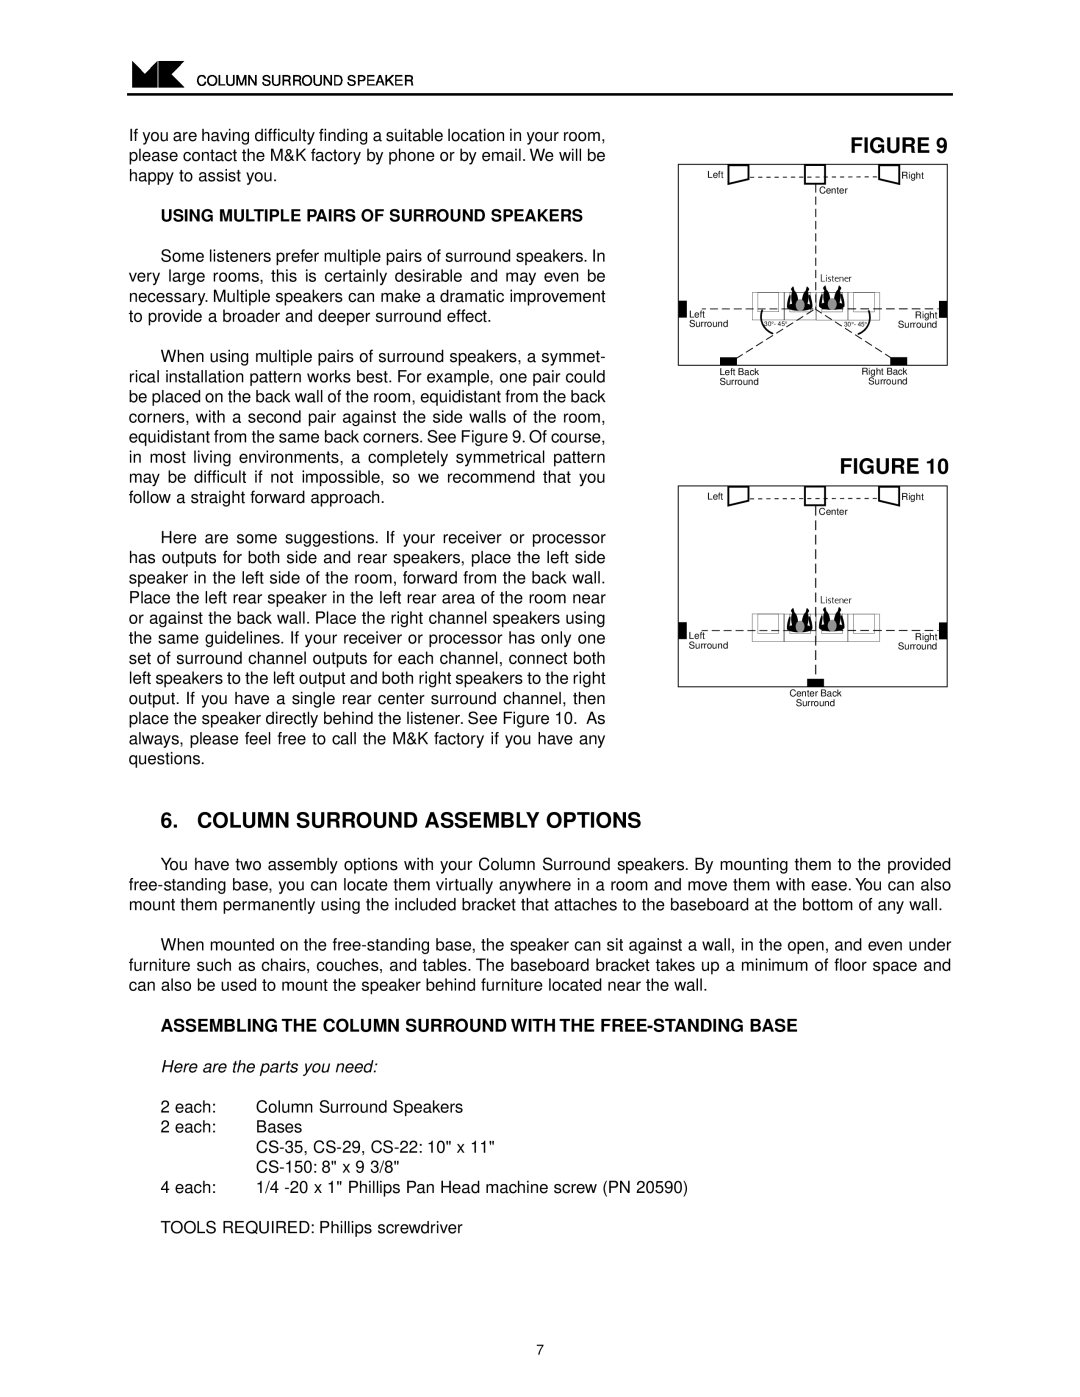 MK Sound CS-150 Column Surround Assembly Options, Using Multiple Pairs Of Surround Speakers, Here are the parts you need 